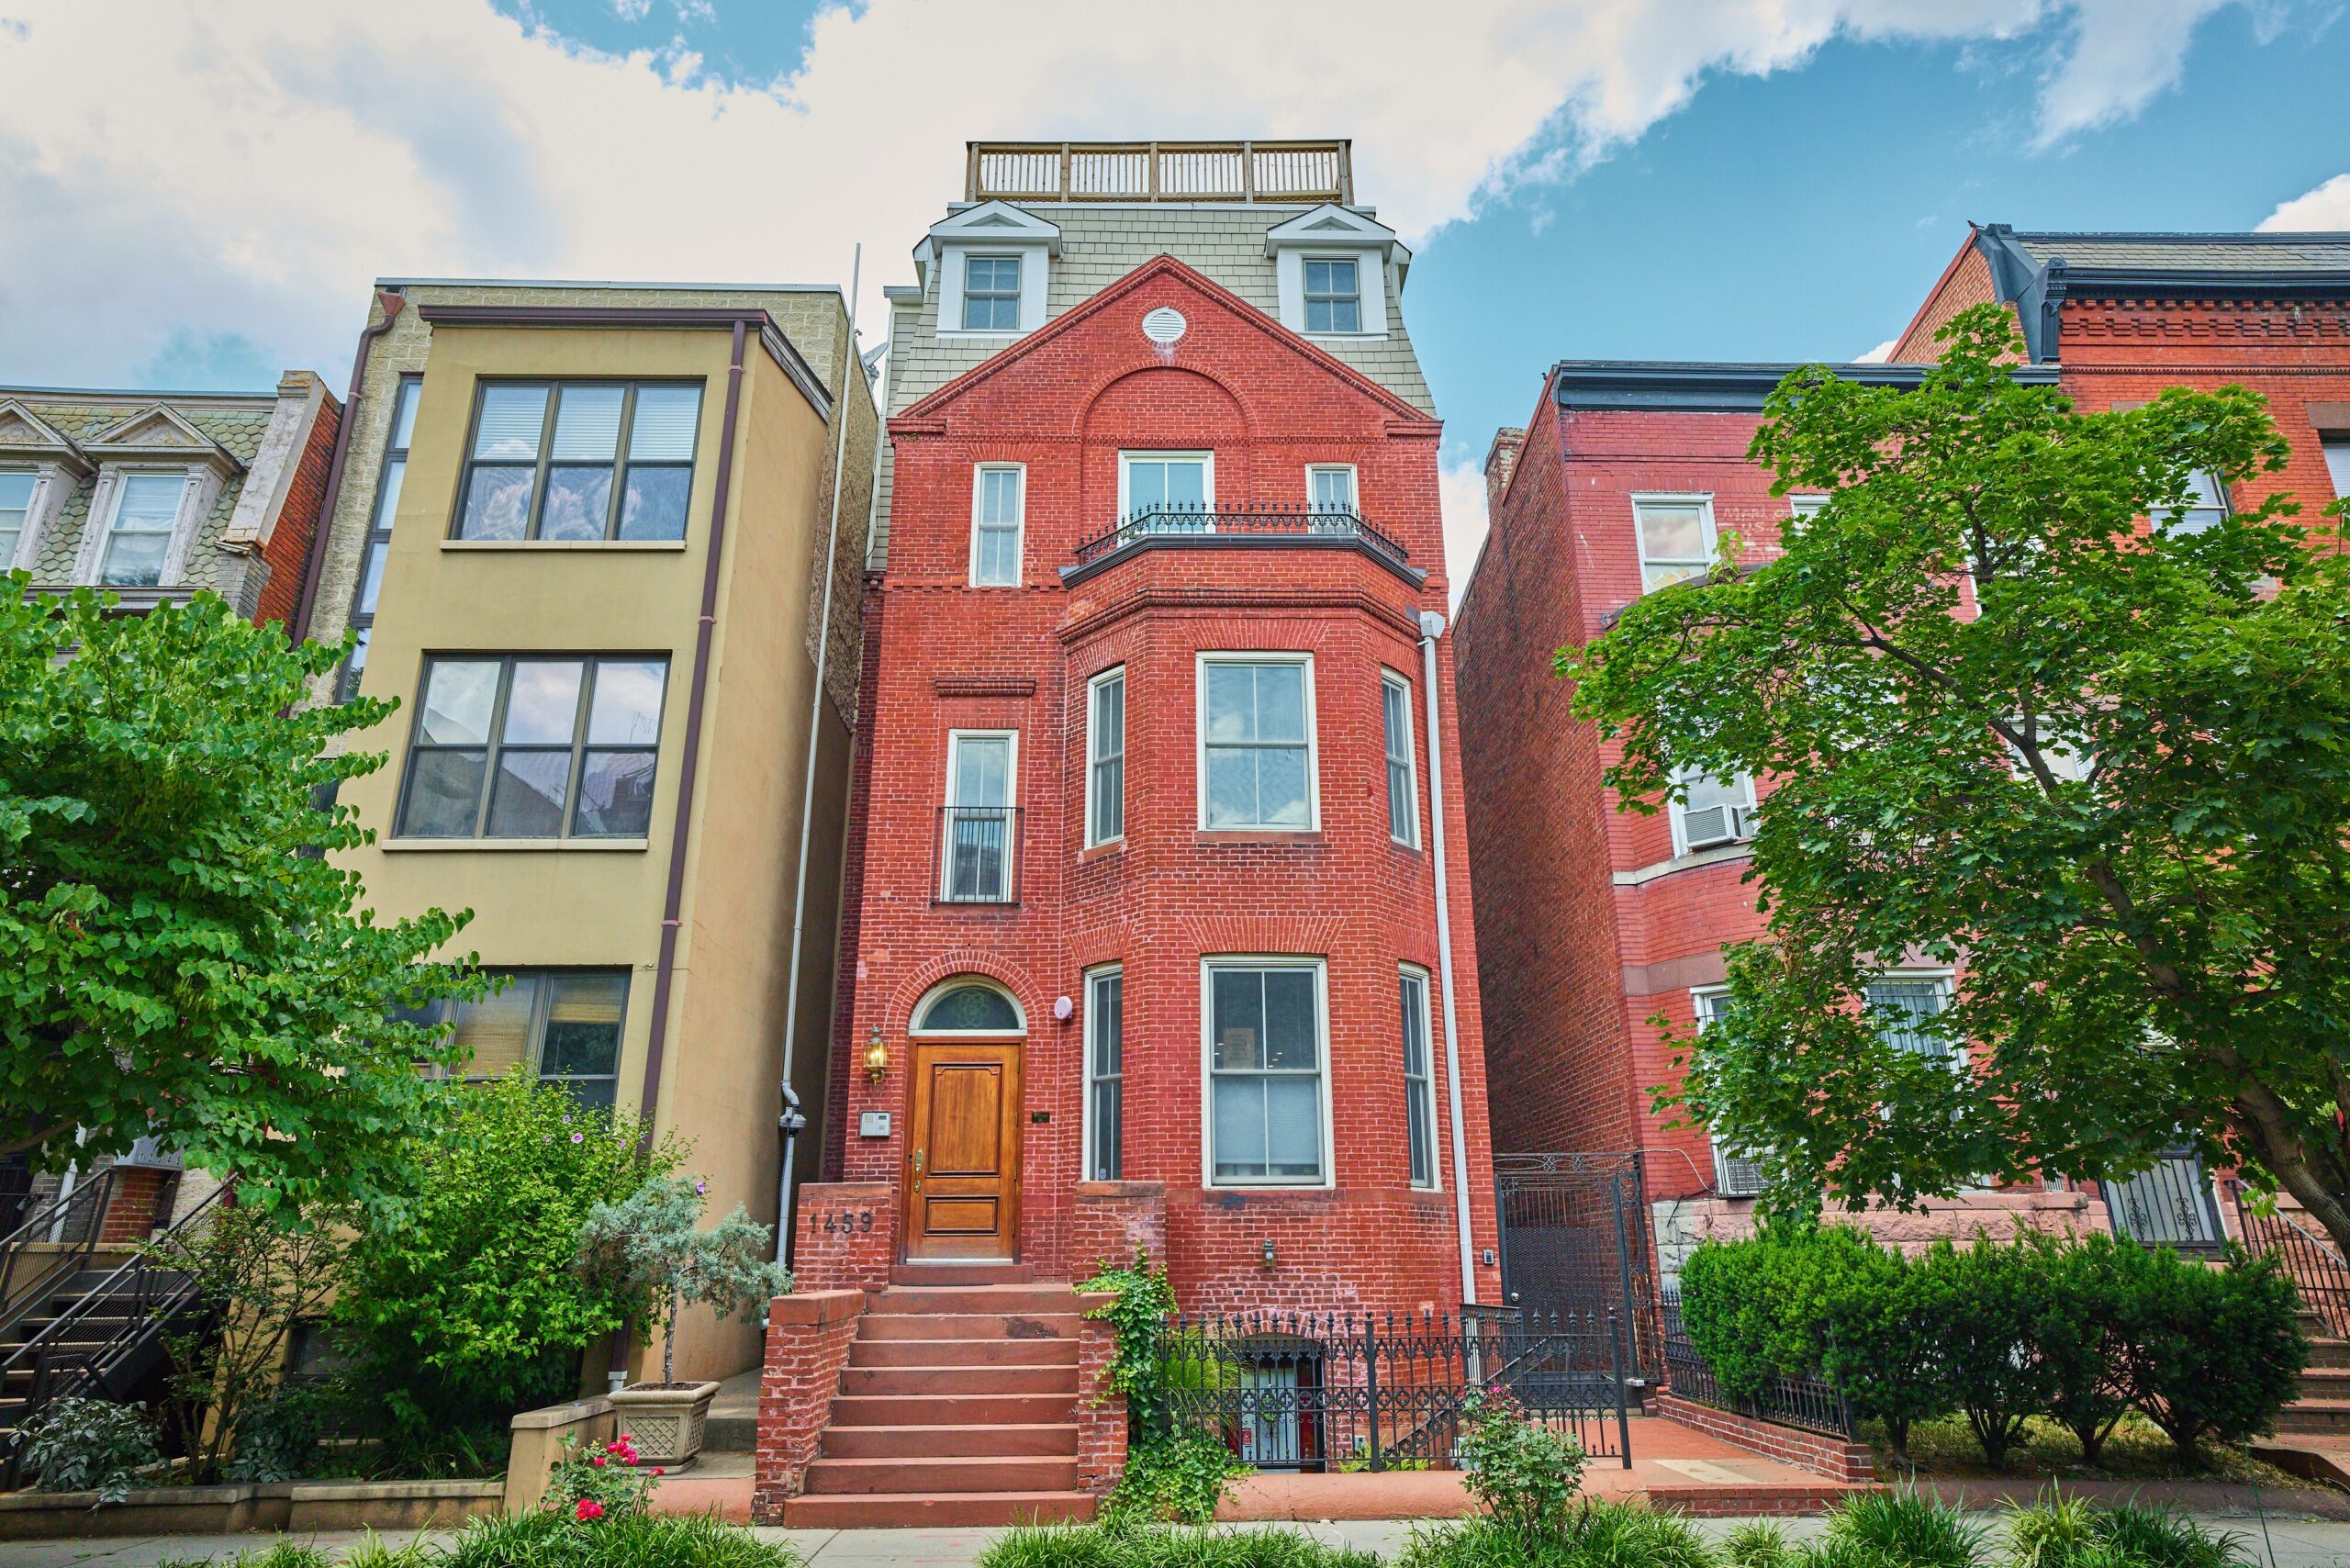 Professional exterior photo of 1459 Harvard St NW #6 - showing an all-brick, 5+ story fully detached building in Northwest Washington, DC. The entrance to #6 is through the alley to the rear